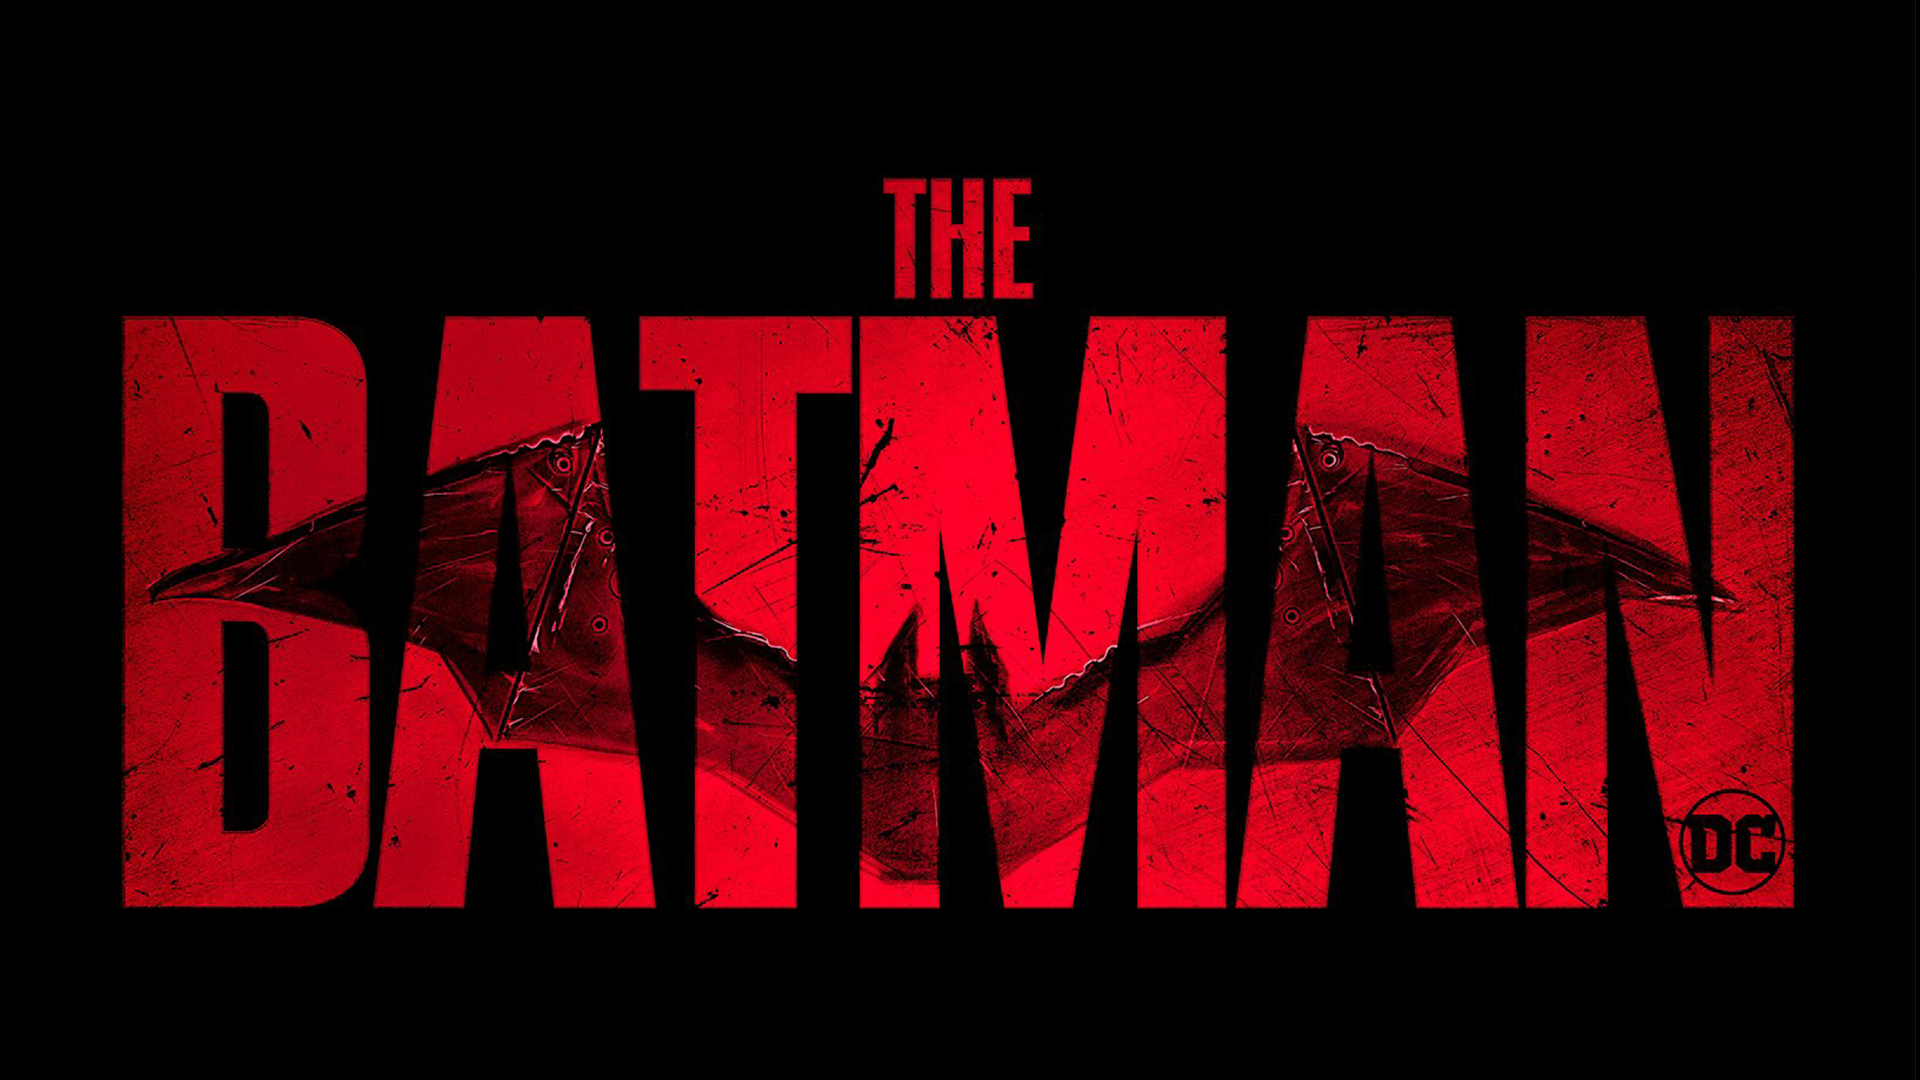 <a href="https://www.youtube.com/watch?v=VlZkpUUM-Rk&feature=emb_title">The Batman is finally released</a>